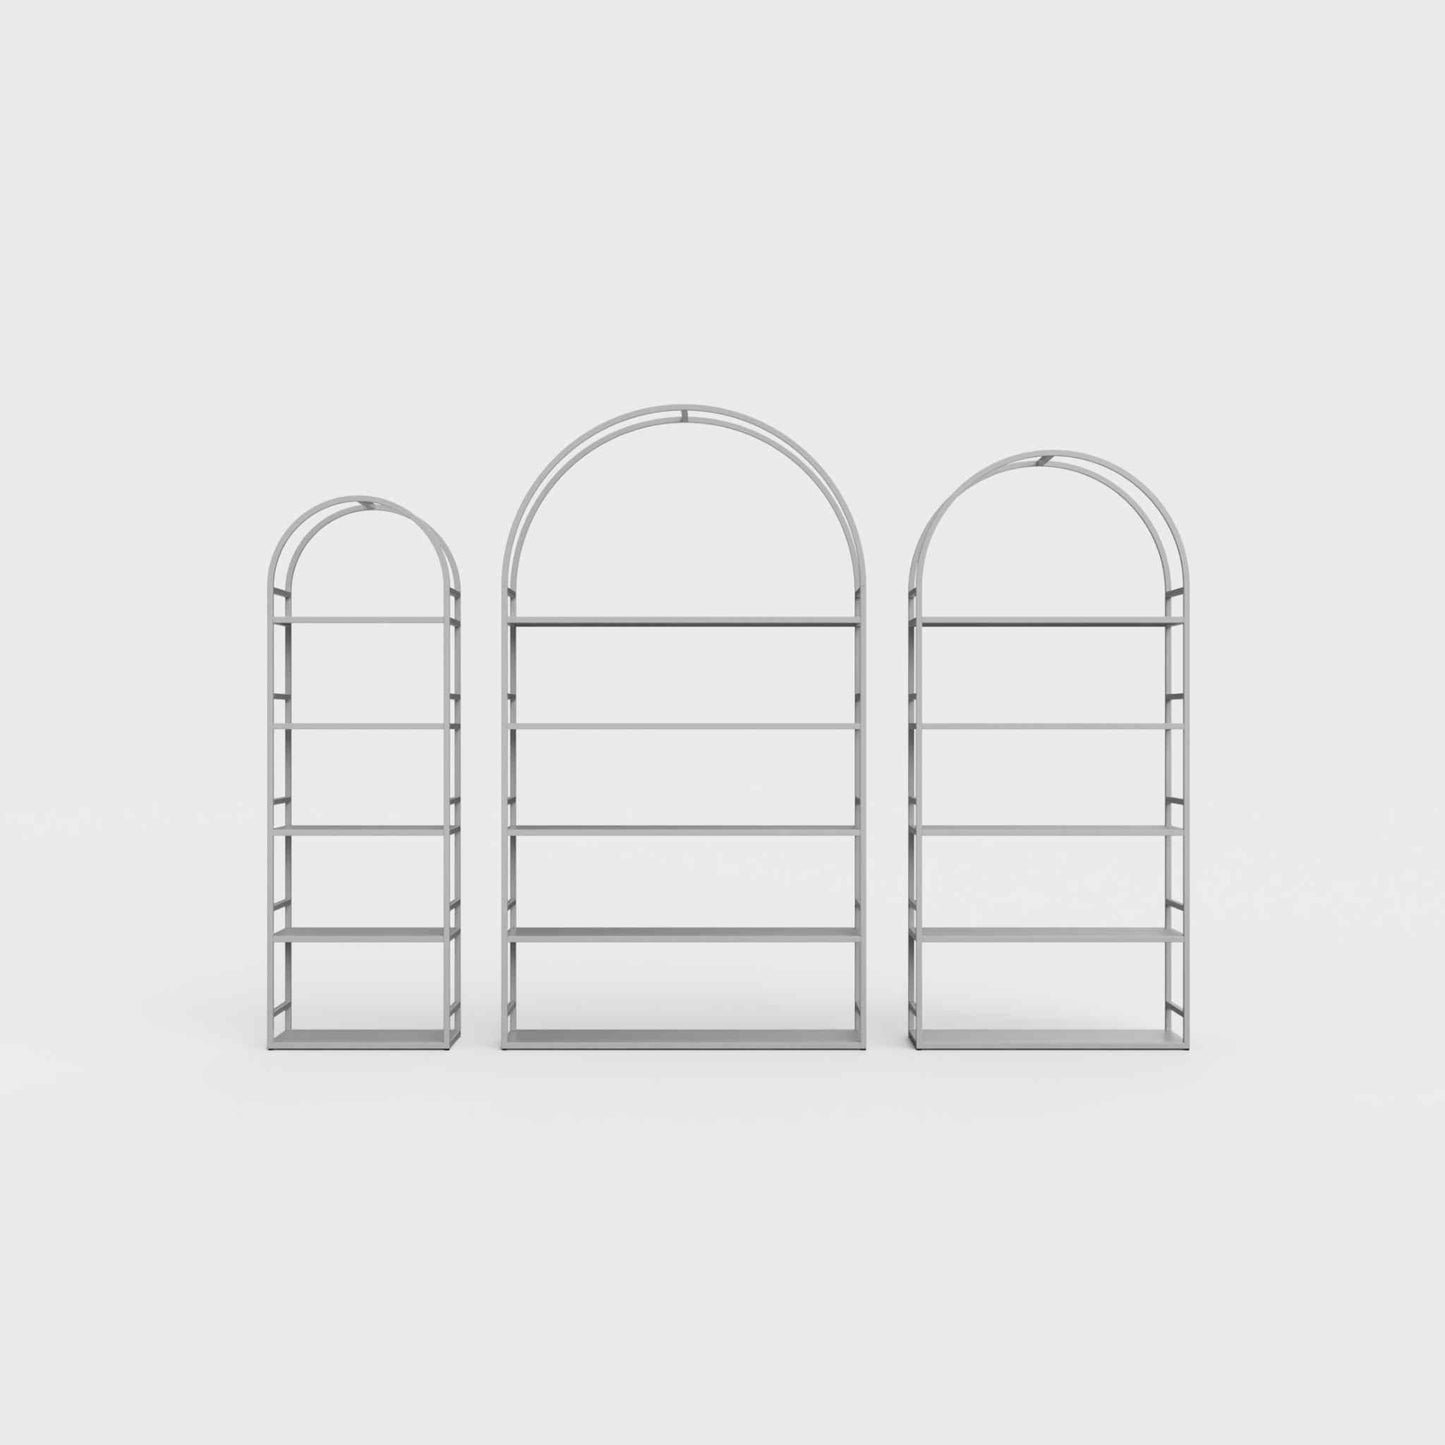 Arched bookcase Arkada, available in Switzerland through ÉTAUDORÉ, made from highest quality powdered coated steel in ashen gray